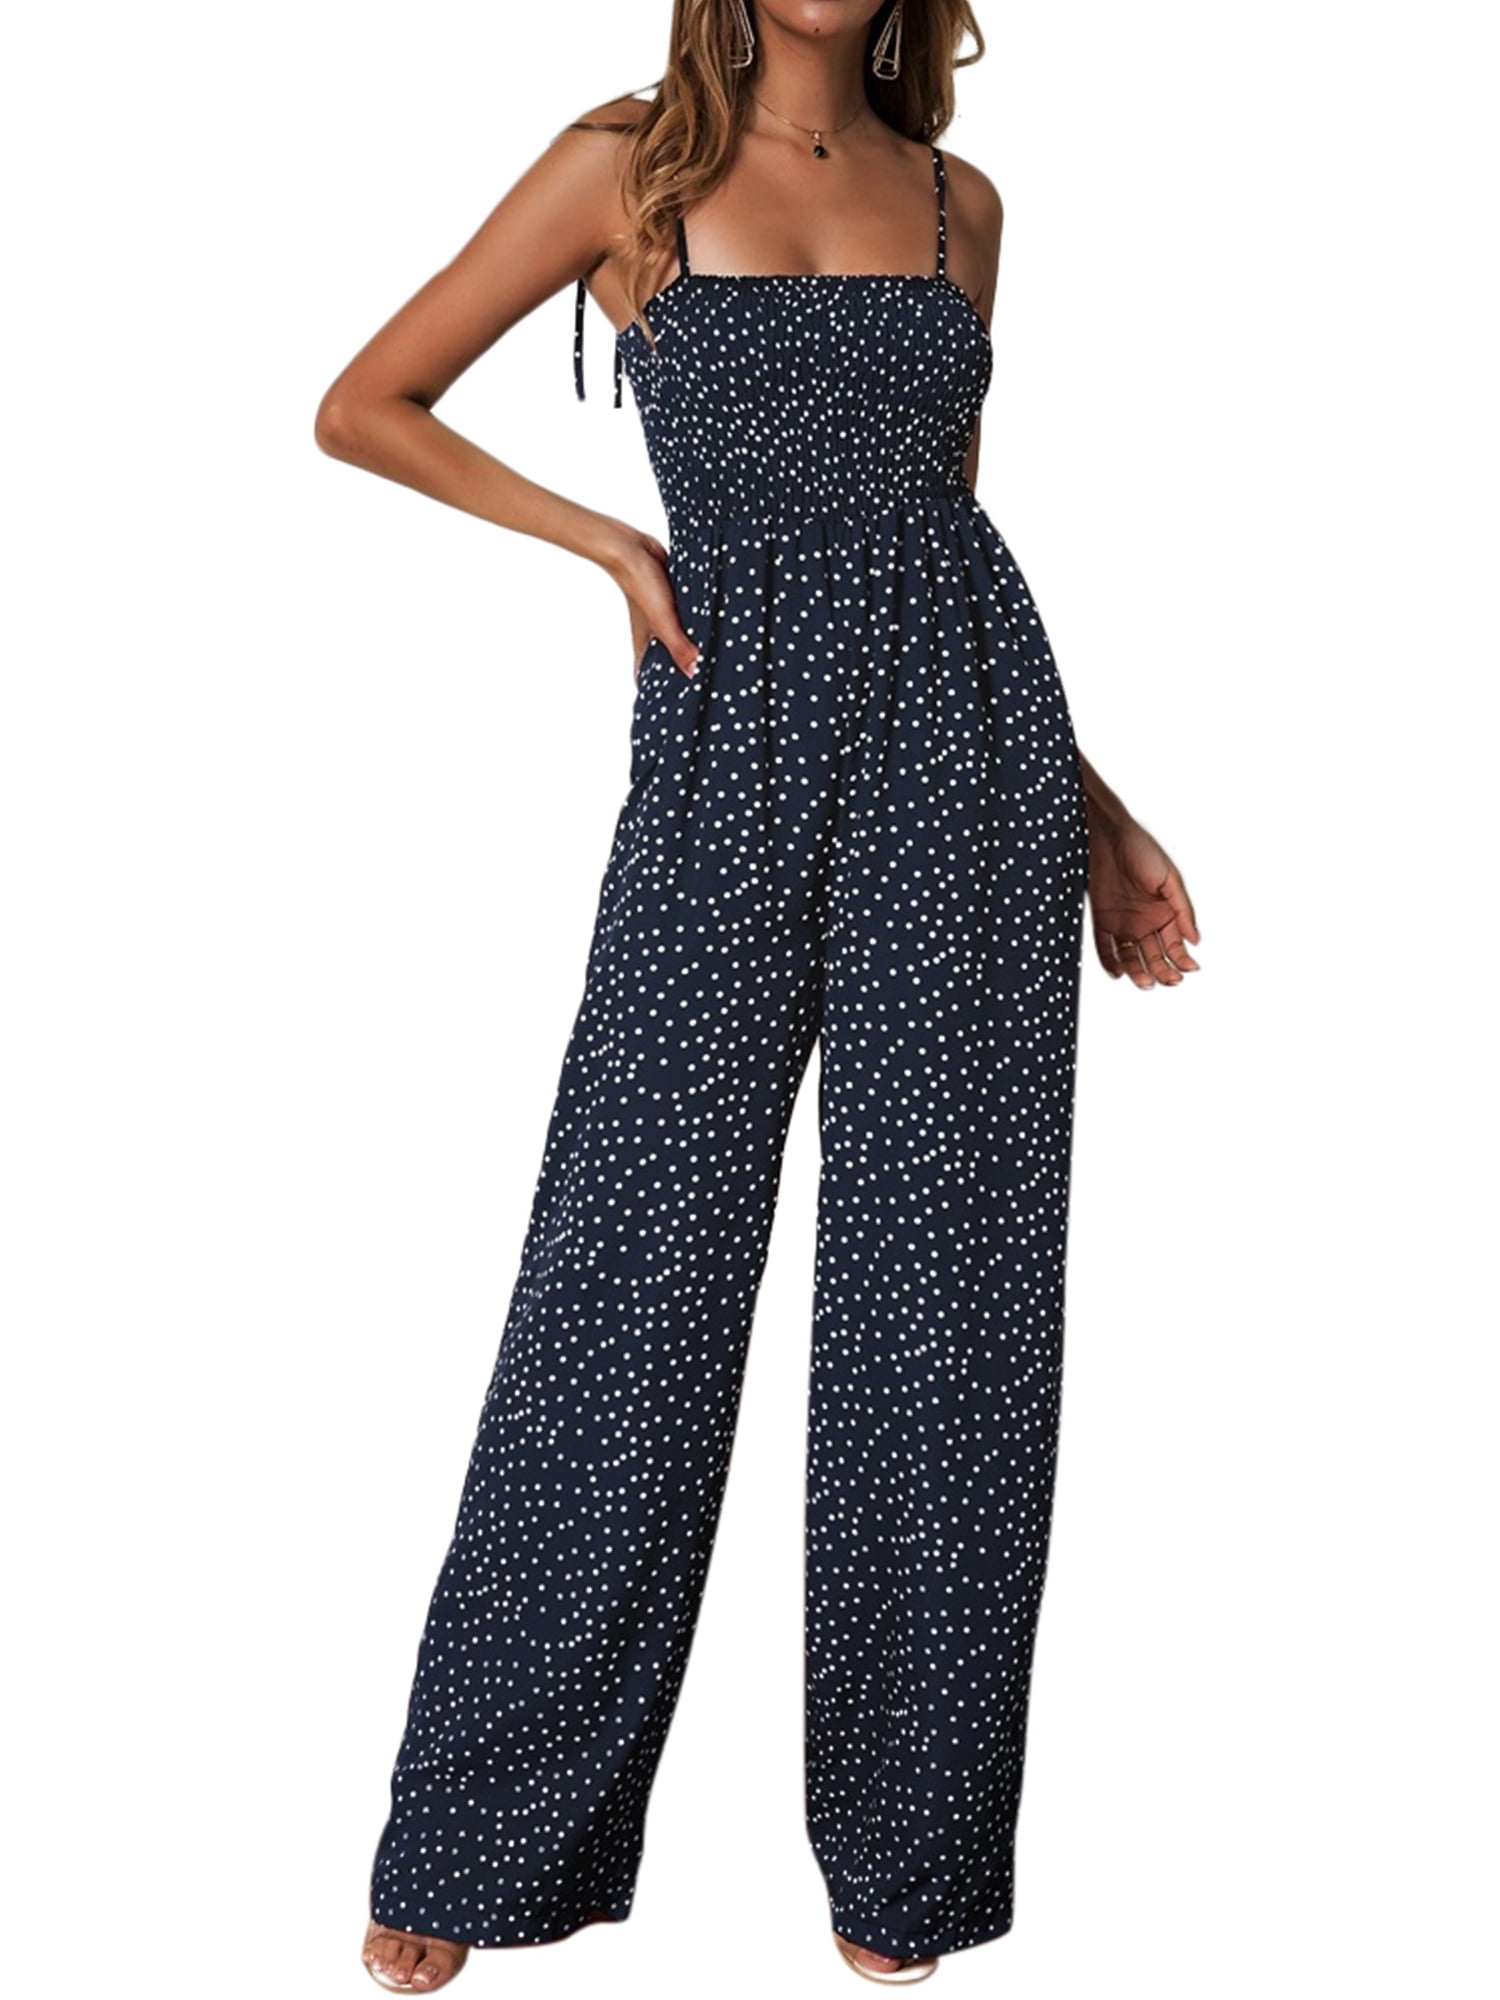 Polka Dot Jumpsuit For Women Sexy Spaghetti Strap Sleeveless Evening Party Playsuit Wide Leg